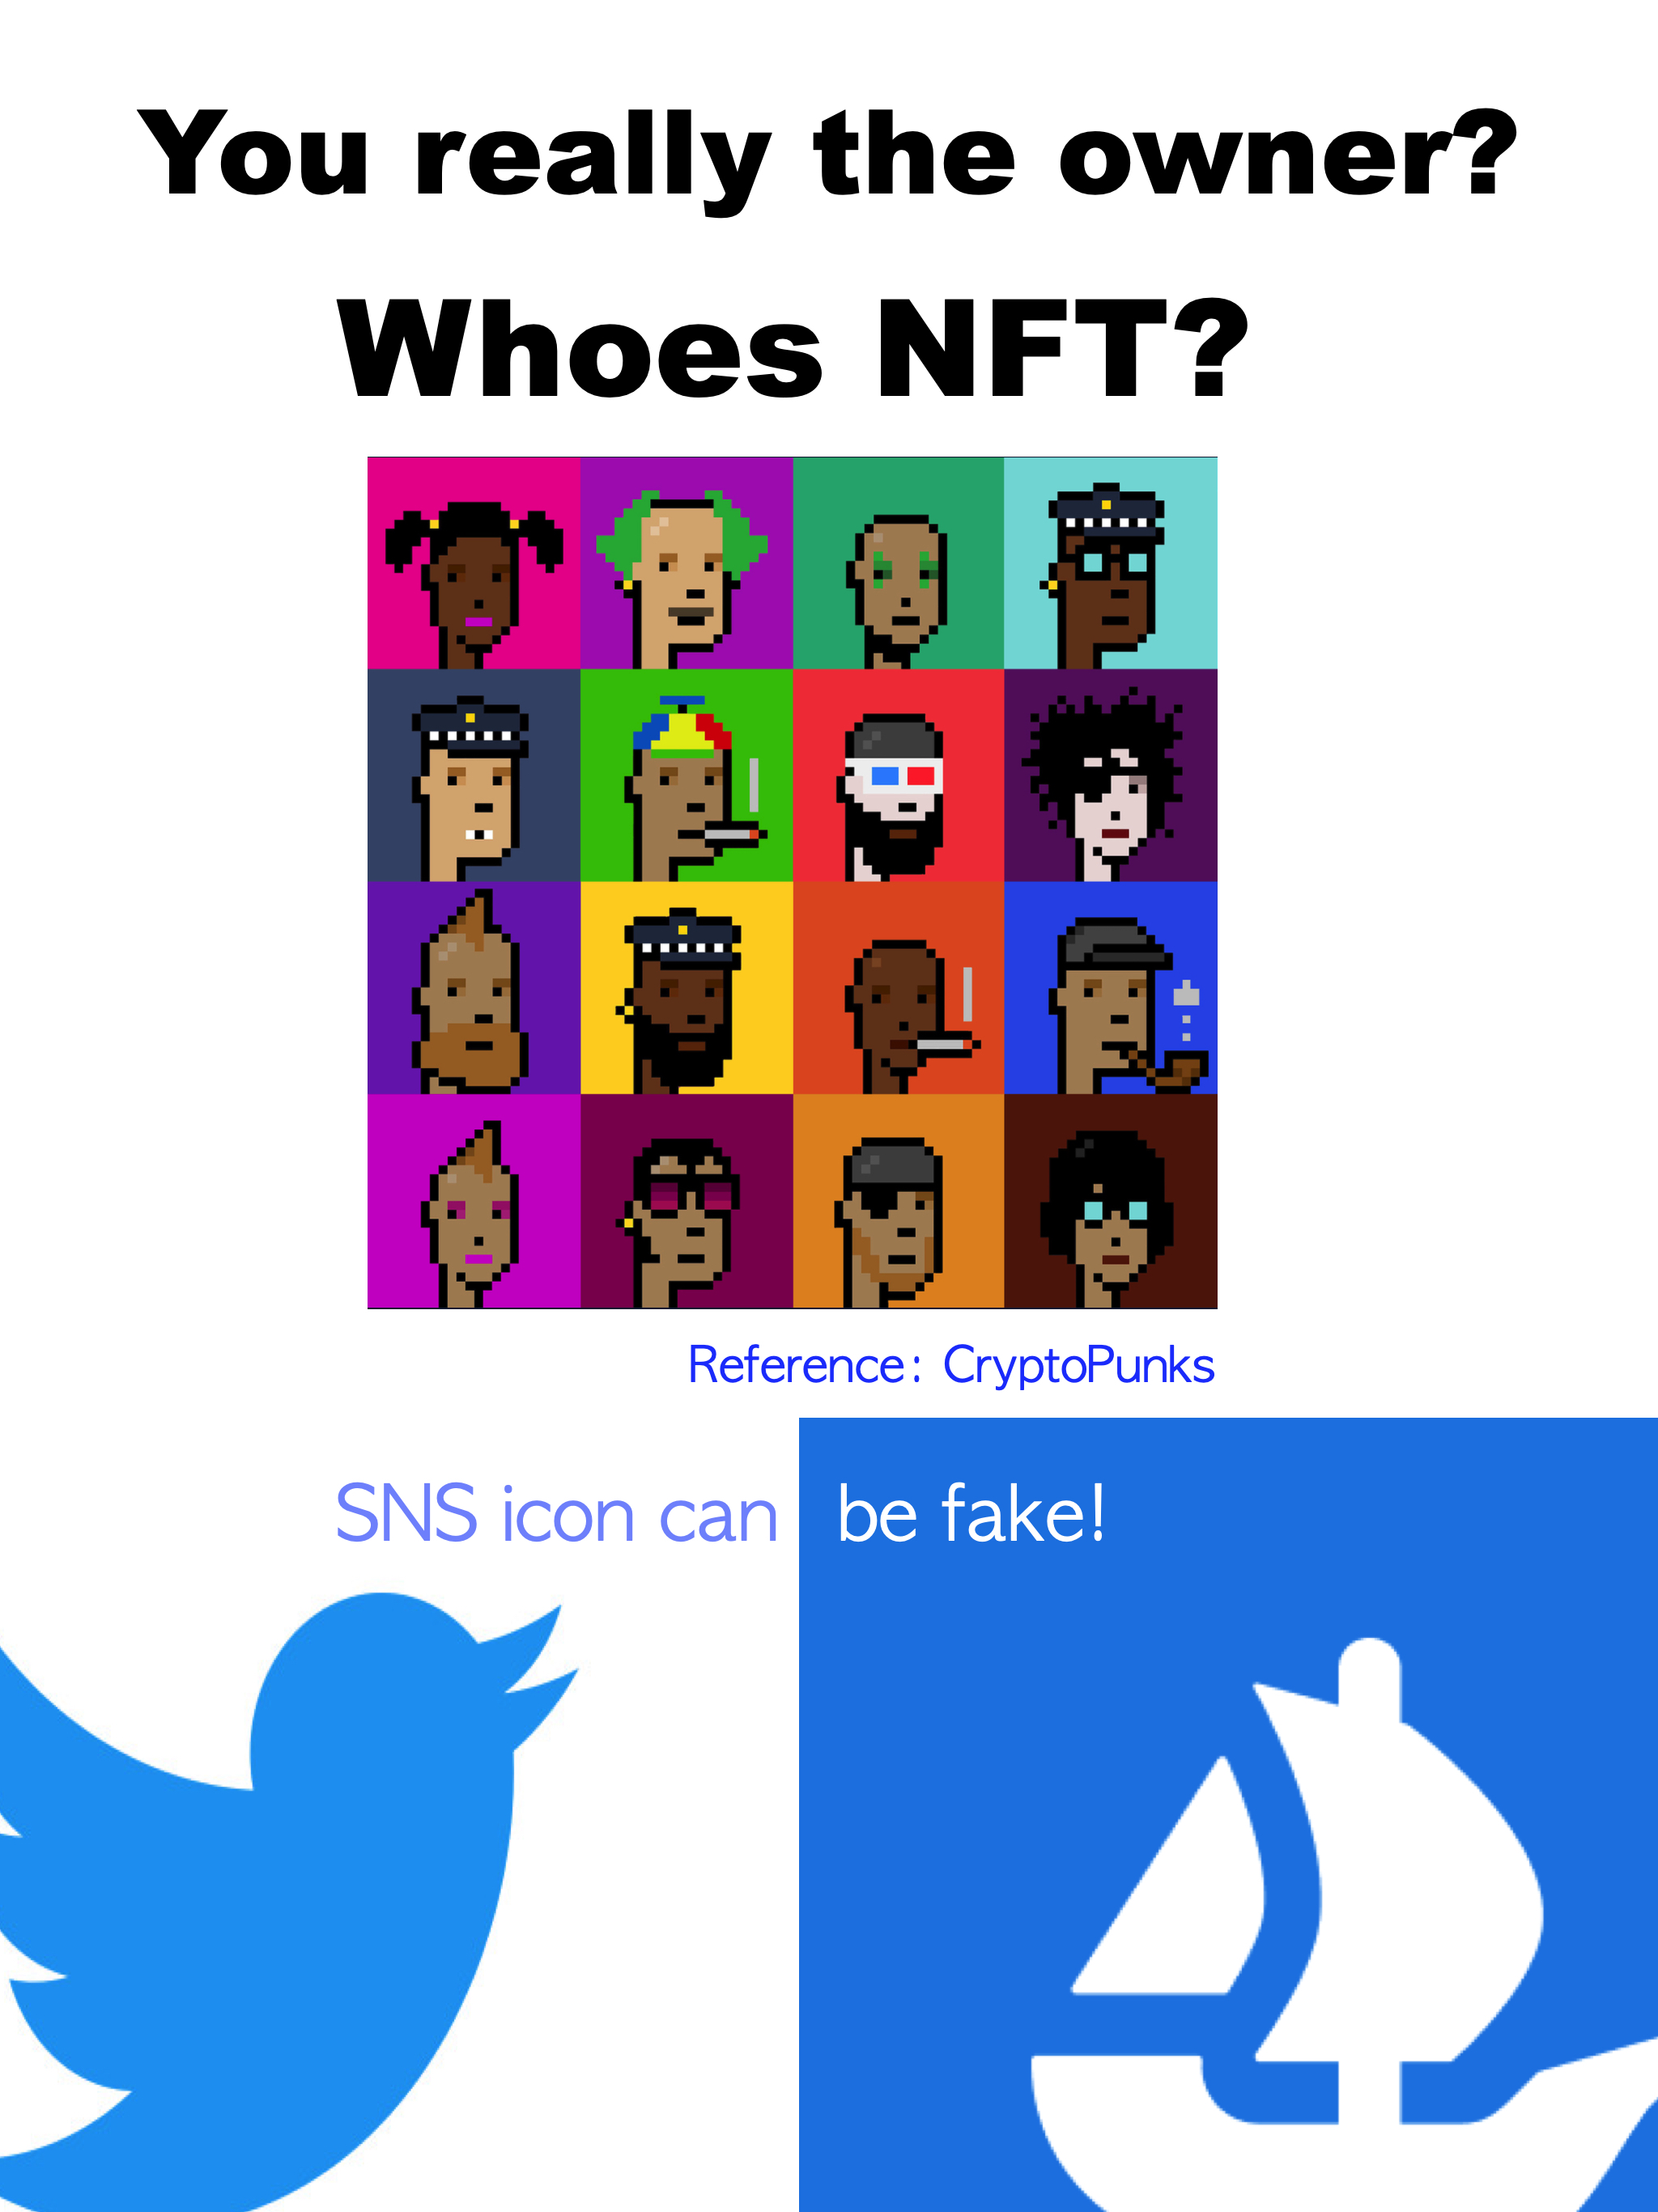 You really the owner? Whoes NFT? SNS icon can be fake. Reference CryptoPunks